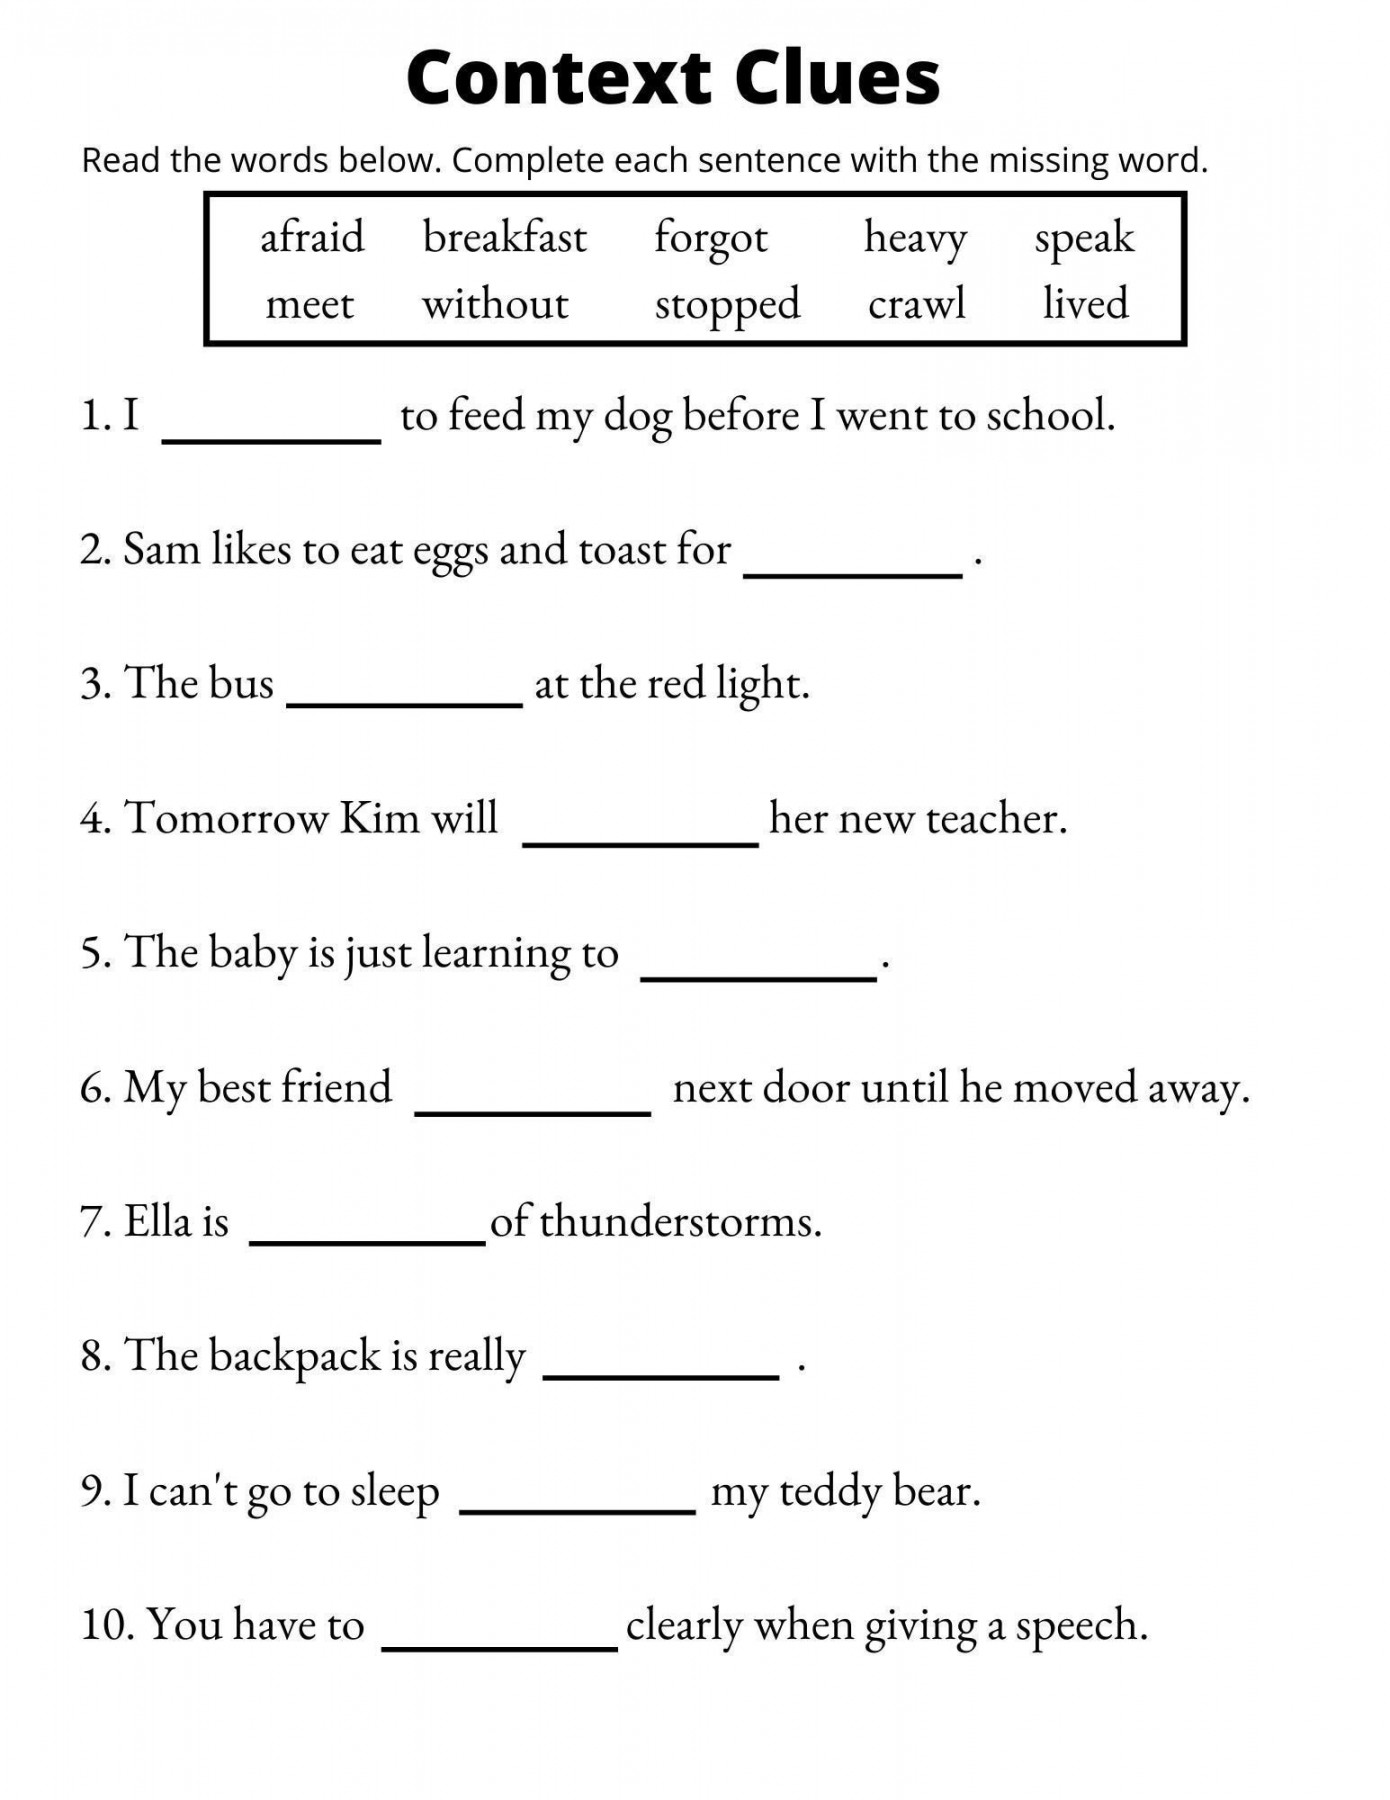 Context Clues Worksheets Vocabulary Printable st - Etsy